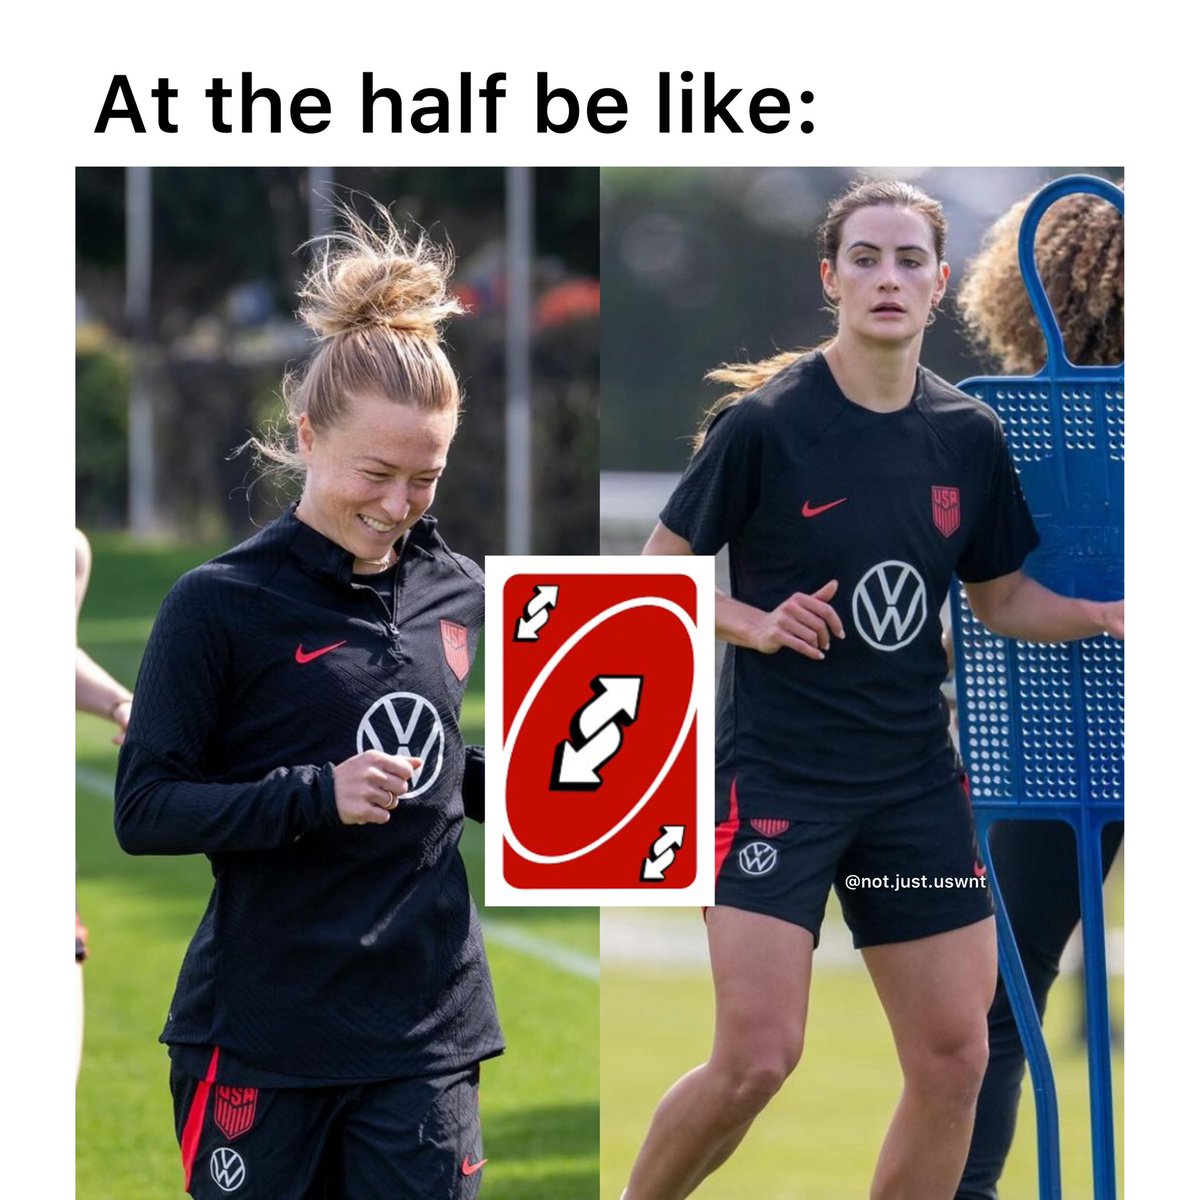 Emily’s switch 
#uswnt #nwsl #soccer #womenssoccer #usmnt #ussoccer #girlssoccer #nwslsoccer #usa #futbol #football #worldcup #wwc #womensworldcup #fifa